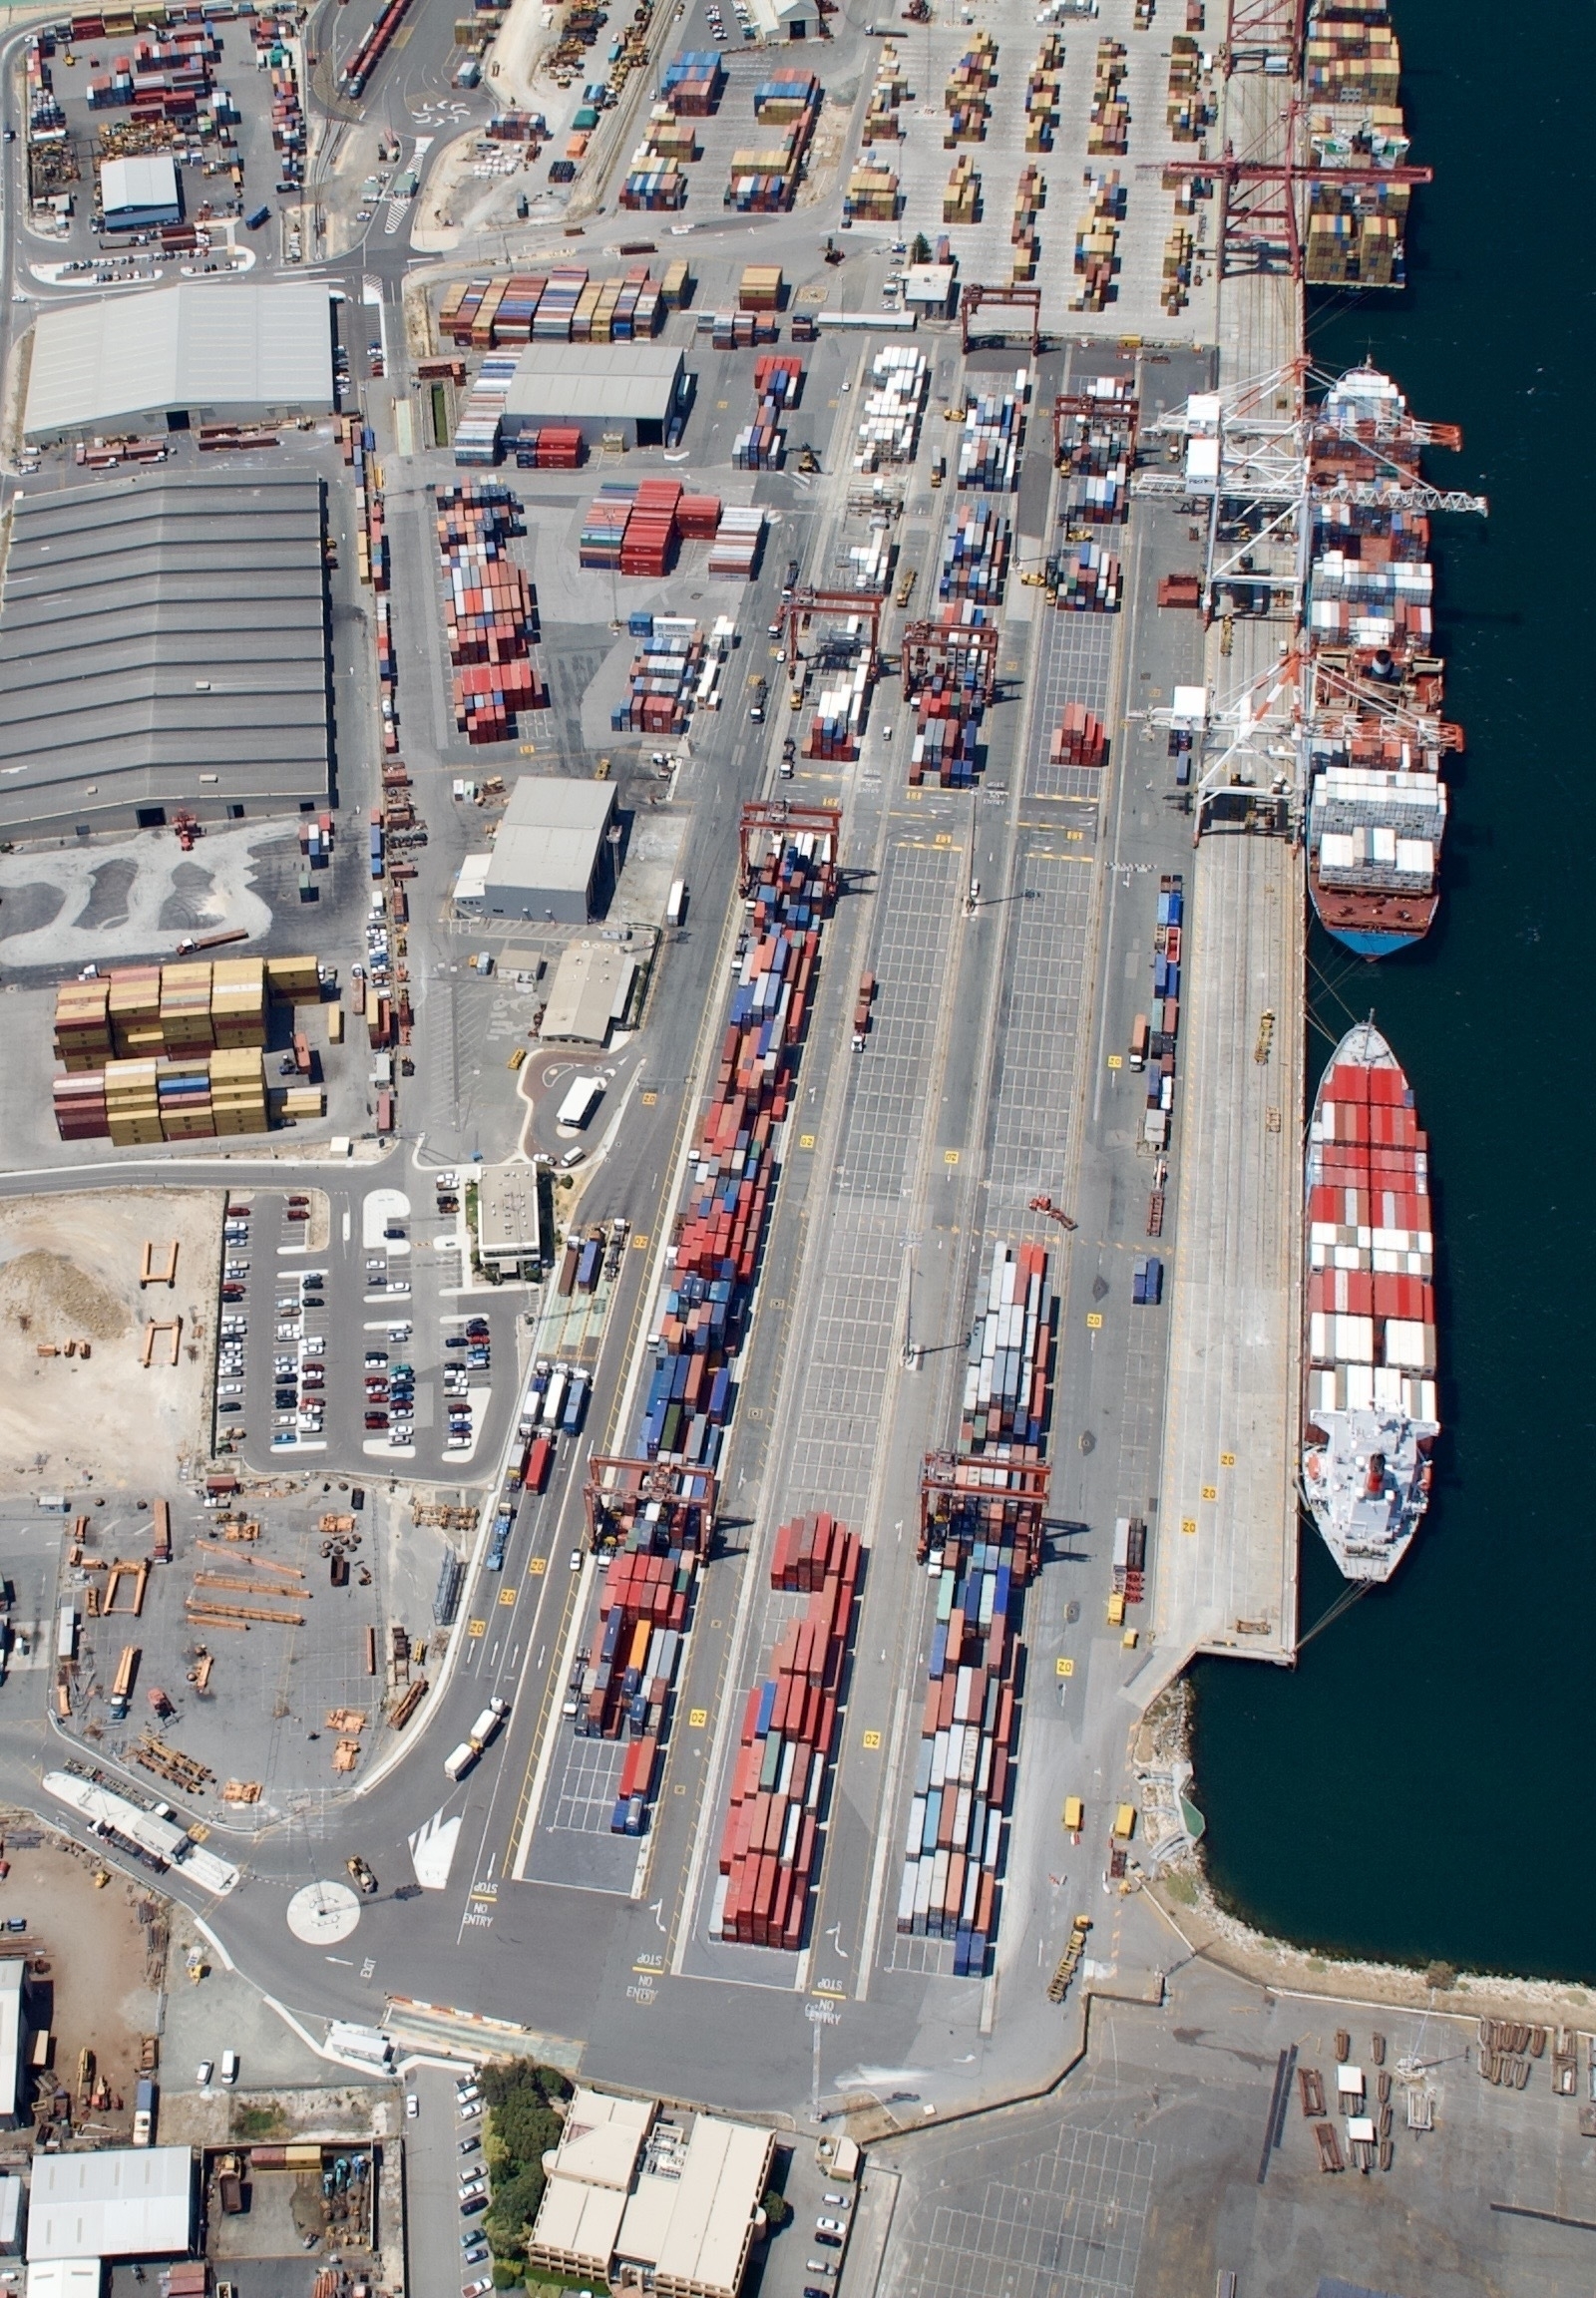 The port of Fremantle seen from the air, with lots of containers and a couple of container ships.